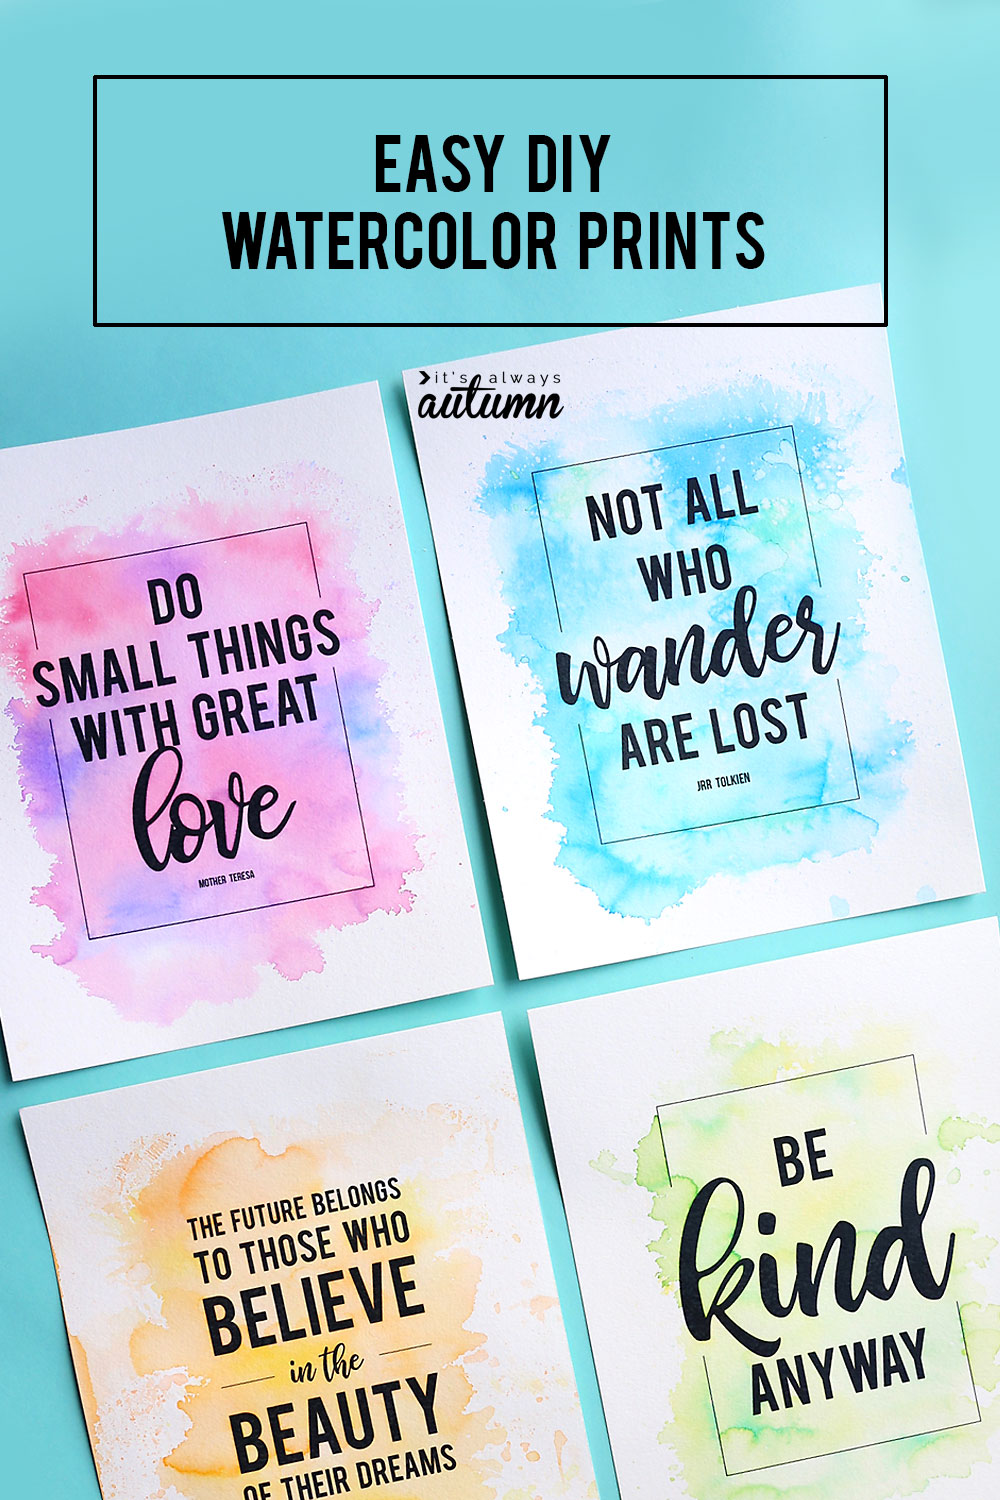 These pretty DIY watercolor prints are made with markers, not paint! So easy anyone can do it.